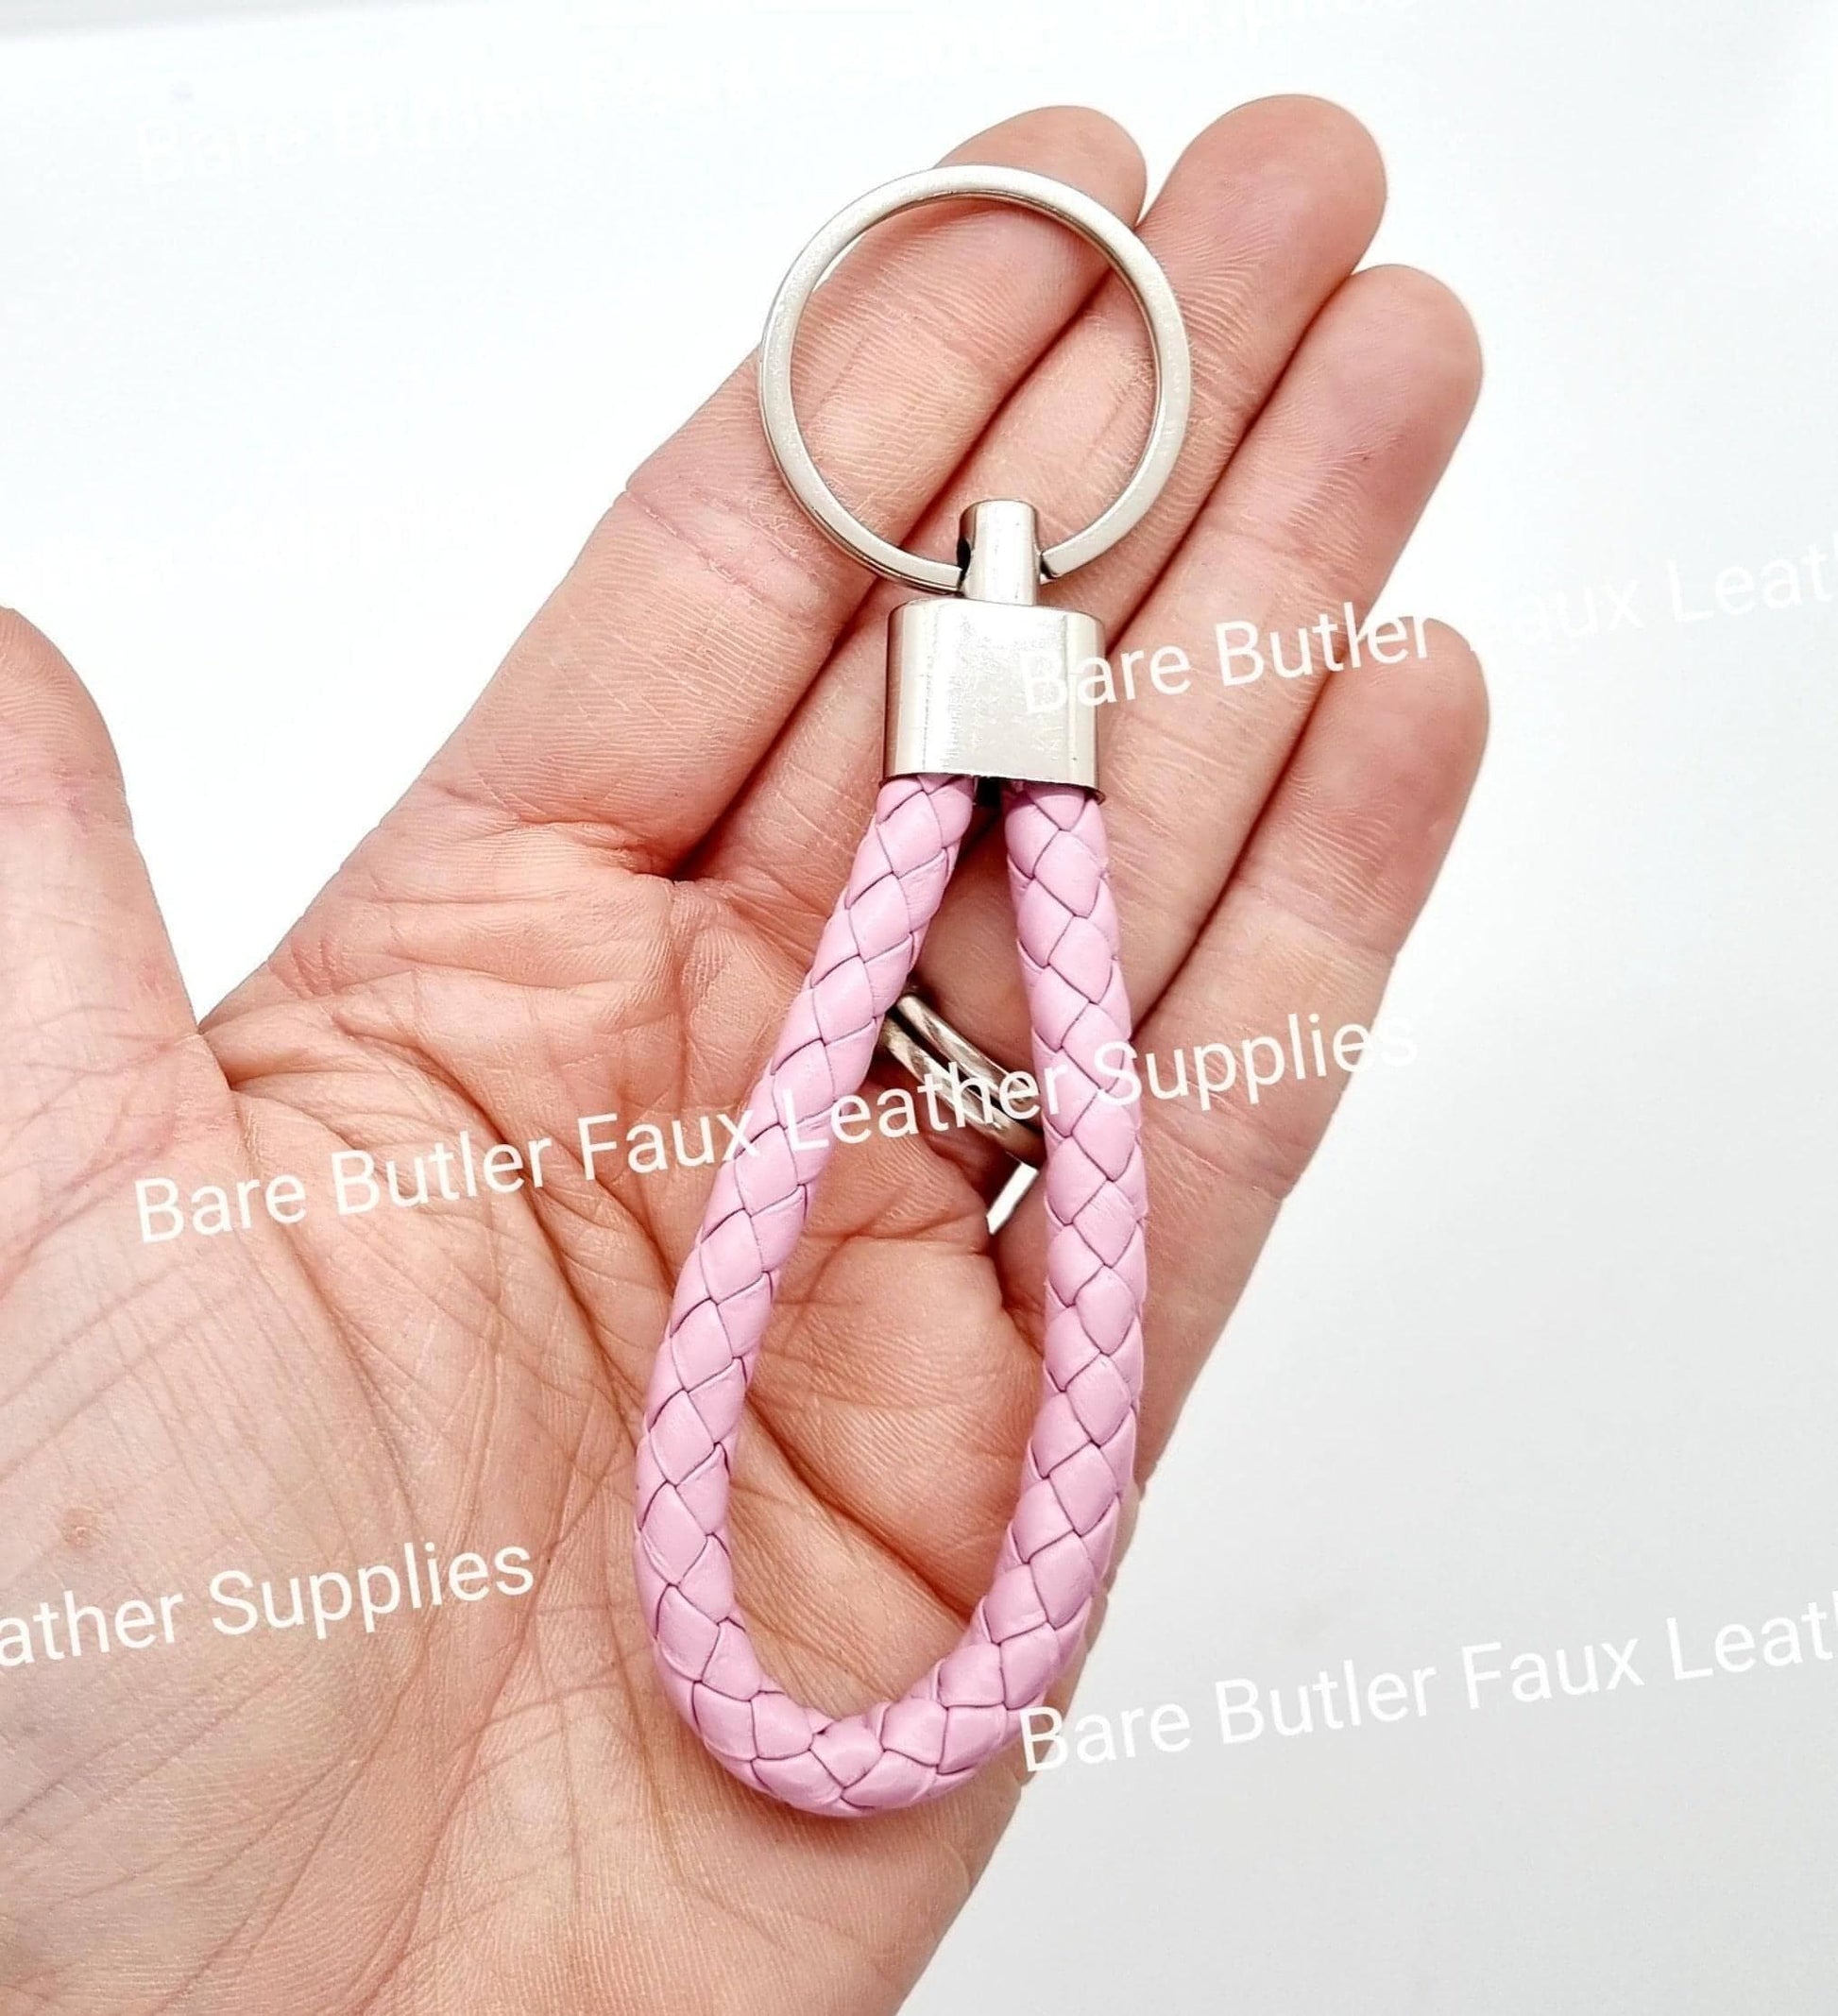 Faux Leather Wrist Strap - Light Pink -  - Bare Butler Faux Leather Supplies 